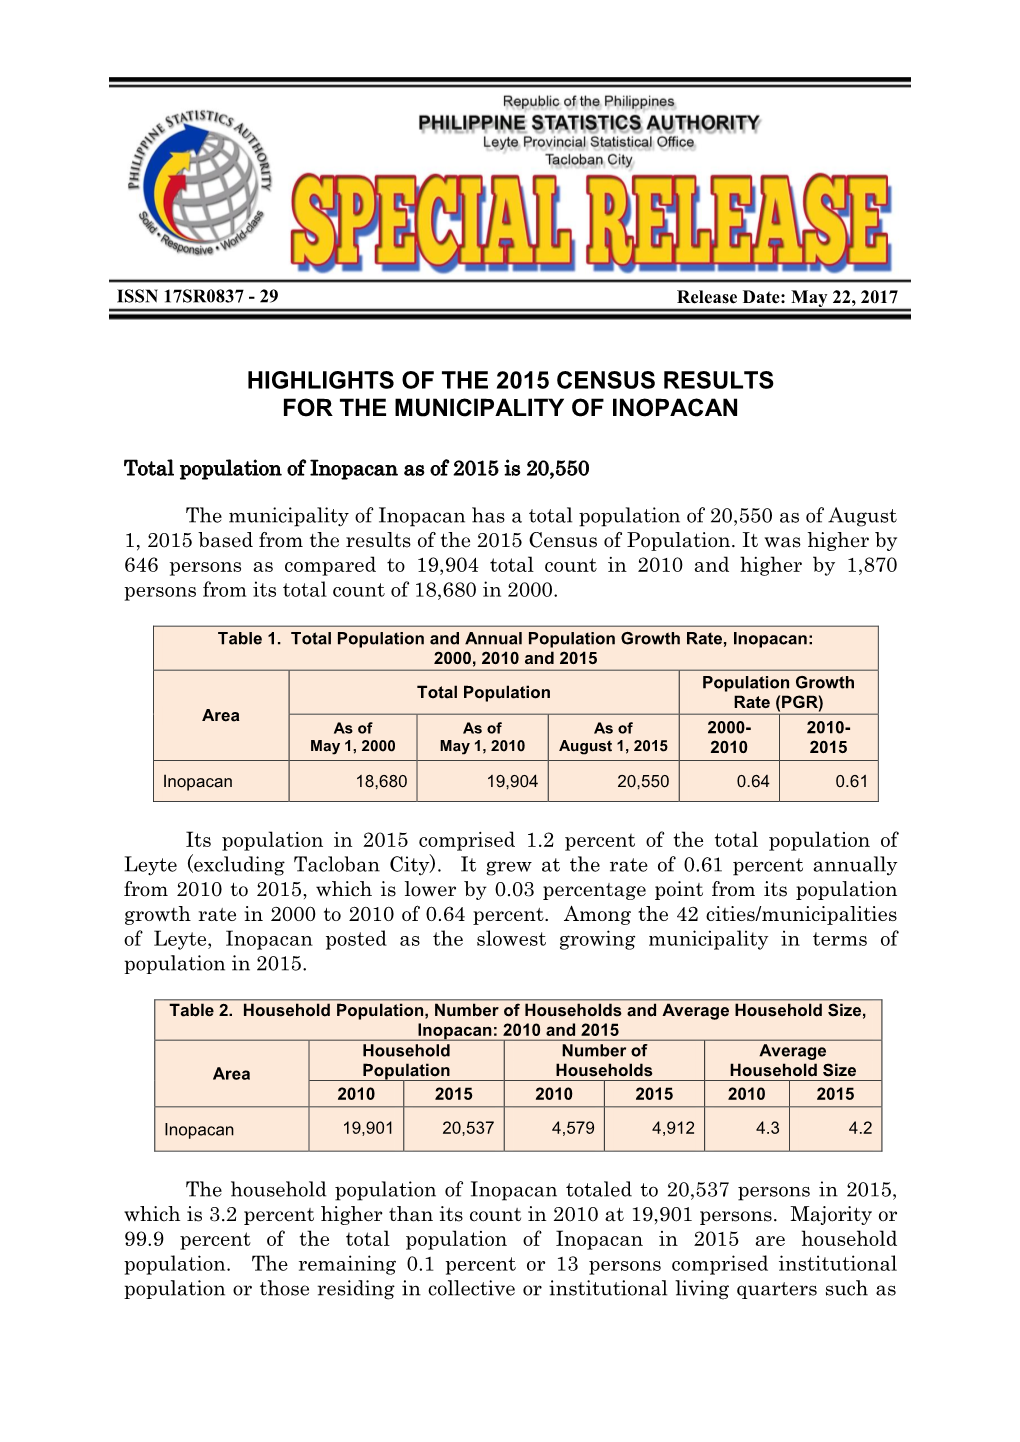 Highlights of the 2015 Census Results for the Municipality of Inopacan